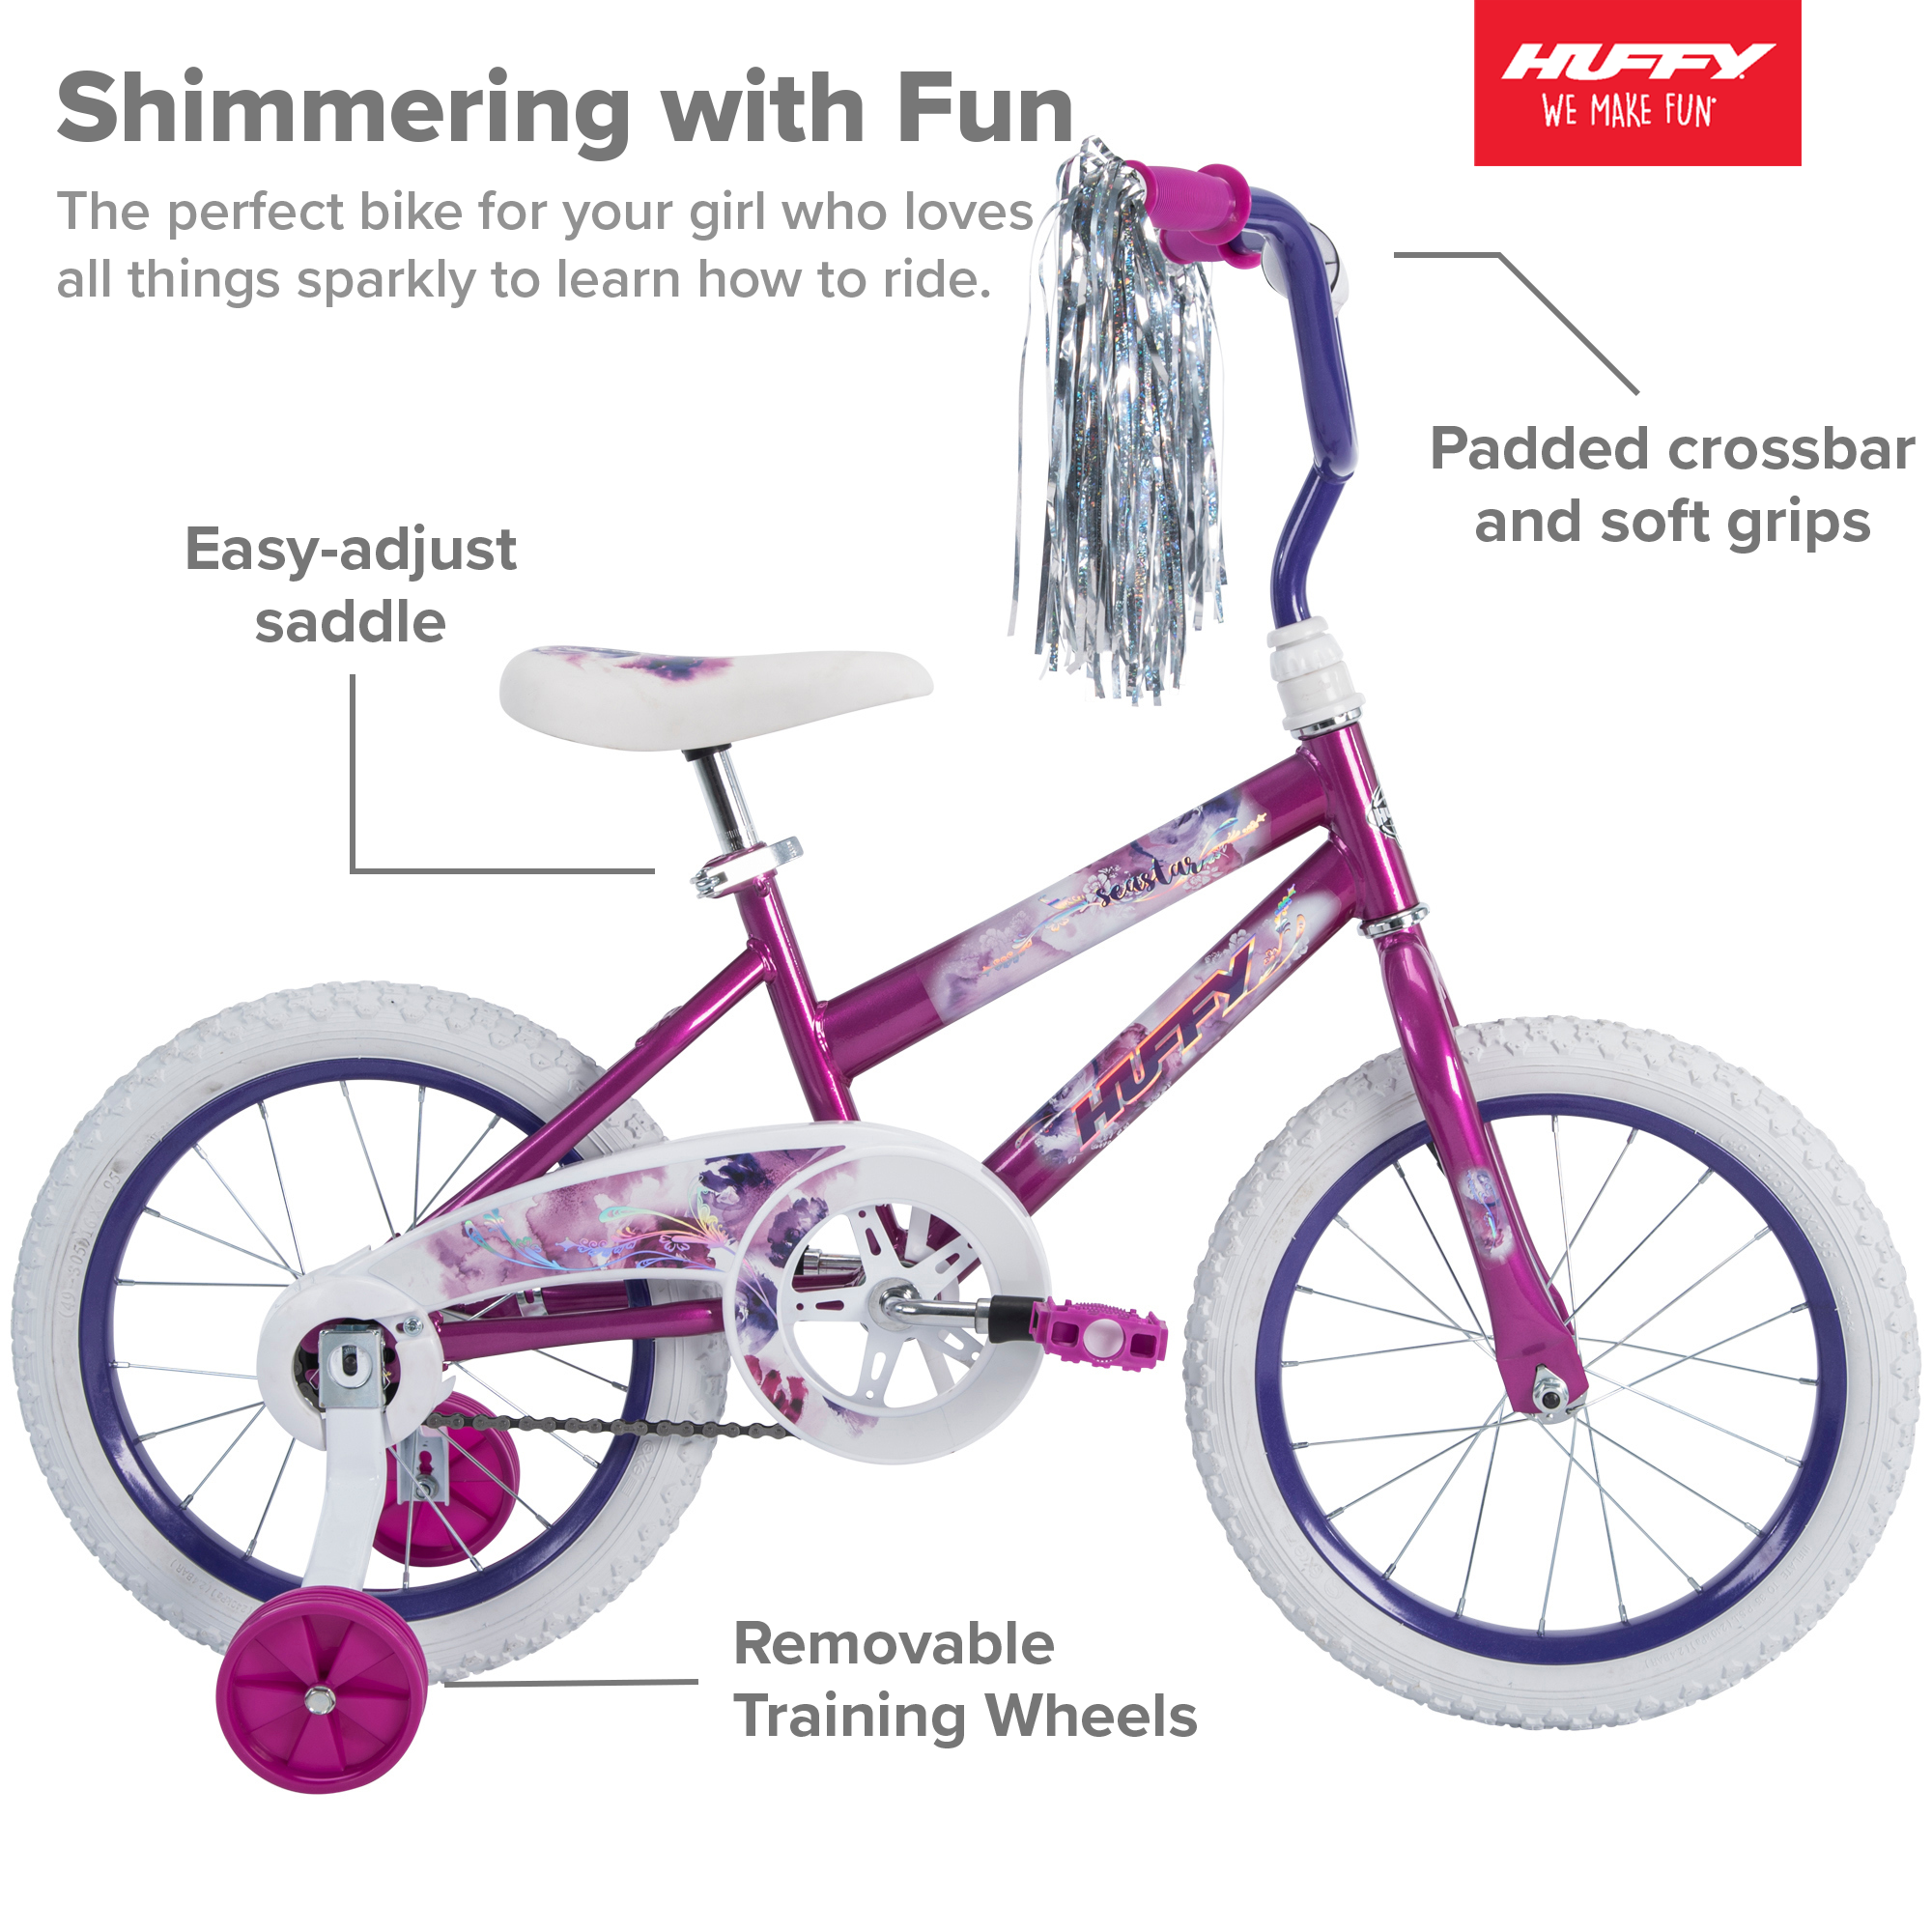 Huffy 16 in. Sea Star Kids Bike for Girls Ages 4 and up, Child, Metallic Purple - image 3 of 10